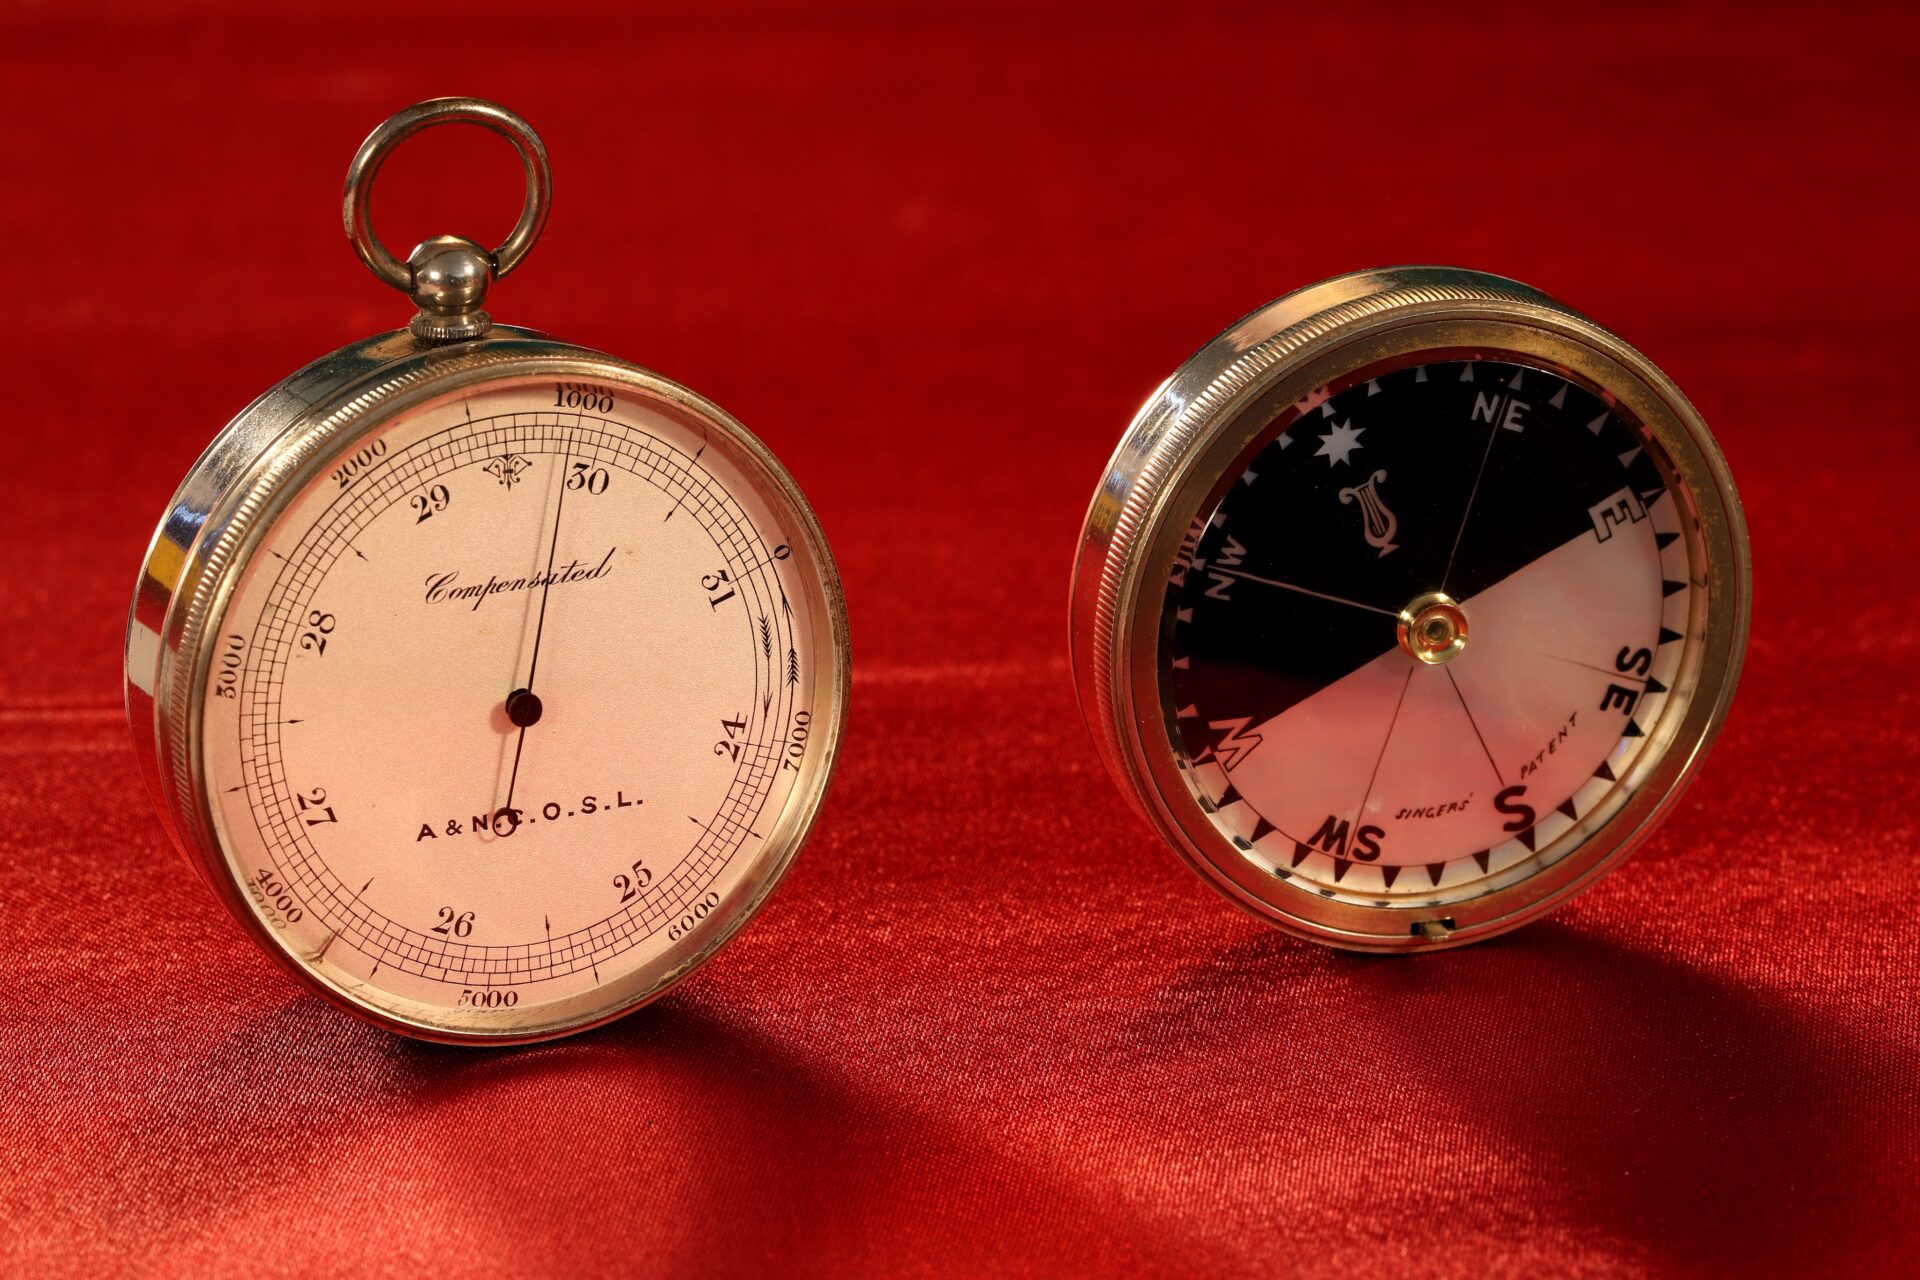 Image of pocket barometer and compass from Army & Navy COSL Pocket Barometer Compendium c1880